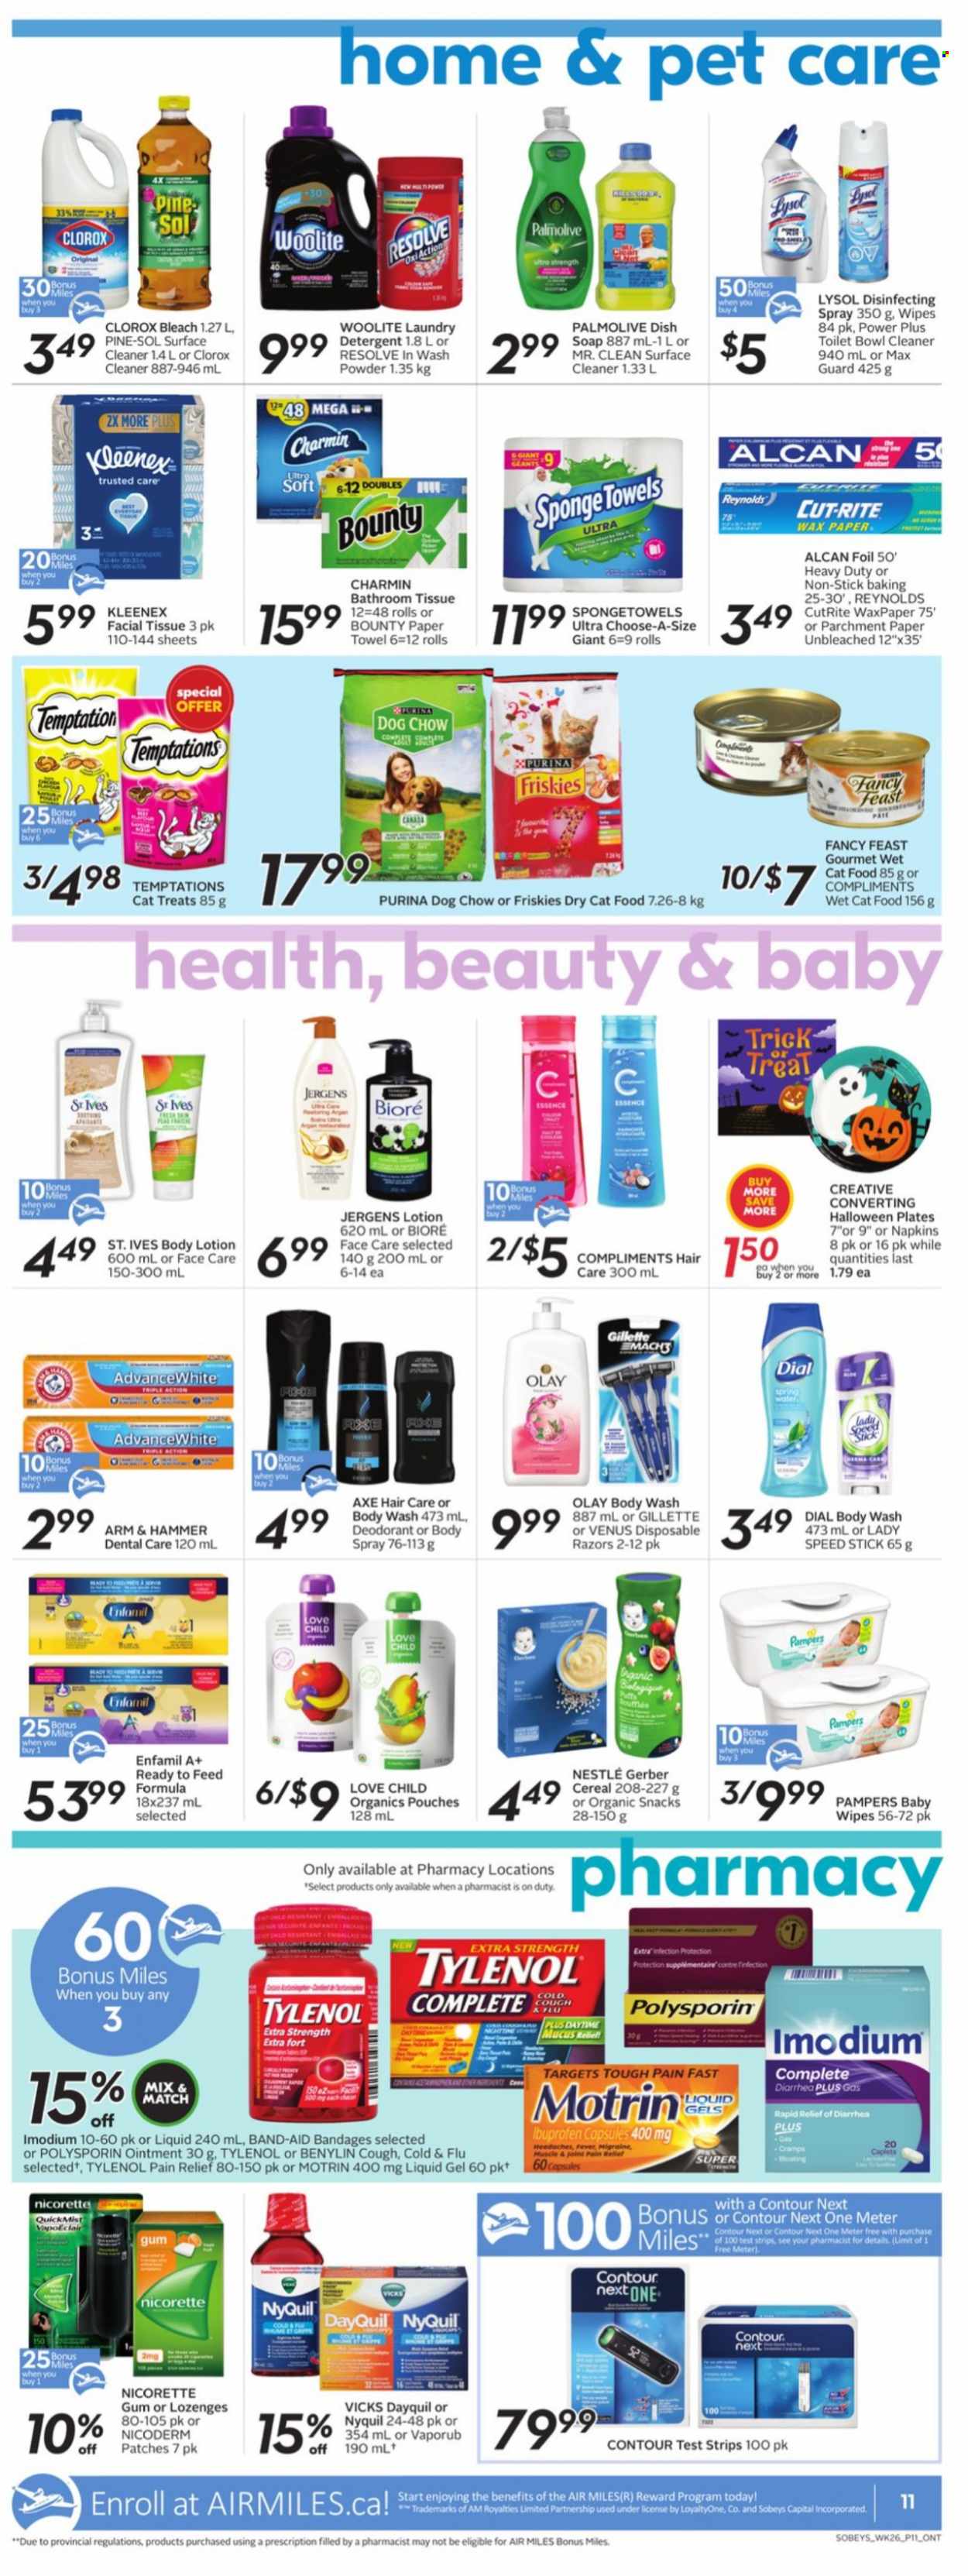 thumbnail - Sobeys Flyer - October 21, 2021 - October 27, 2021 - Sales products - snack, Bounty, Gerber, ARM & HAMMER, cereals, Enfamil, wipes, baby wipes, napkins, ointment, bath tissue, Kleenex, paper towels, Charmin, surface cleaner, cleaner, bleach, Lysol, Clorox, Woolite, Pine-Sol, laundry detergent, body wash, Palmolive, Dial, soap, Olay, Bioré®, body lotion, body spray, Jergens, anti-perspirant, Speed Stick, Venus, disposable razor, Vicks, contour, animal food, cat food, Dog Chow, Purina, dry cat food, Fancy Feast, Friskies, wet cat food, pain relief, DayQuil, Cold & Flu, NicoDerm, Nicorette, Tylenol, Ibuprofen, NyQuil, VapoRub, Nicorette Gum, Benylin, Motrin, Nestlé, band-aid, detergent, Gillette, Imodium, Pampers, deodorant. Page 11.